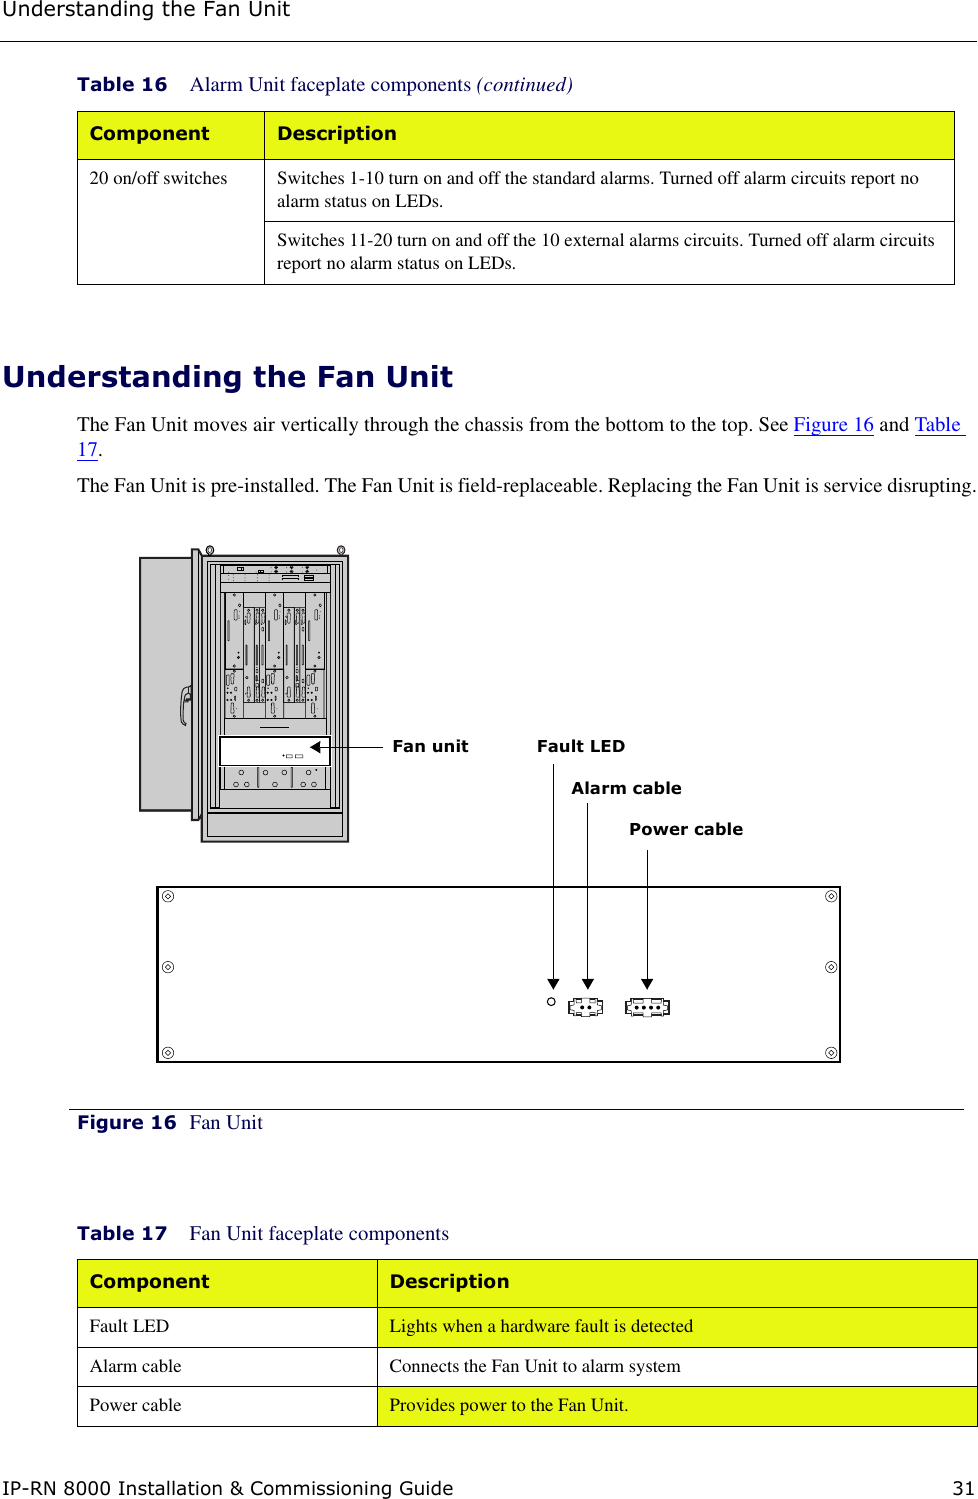 Understanding the Fan UnitIP-RN 8000 Installation &amp; Commissioning Guide 31Understanding the Fan UnitThe Fan Unit moves air vertically through the chassis from the bottom to the top. See Figure 16 and Table 17.The Fan Unit is pre-installed. The Fan Unit is field-replaceable. Replacing the Fan Unit is service disrupting.Figure 16 Fan Unit 20 on/off switches Switches 1-10 turn on and off the standard alarms. Turned off alarm circuits report no alarm status on LEDs. Switches 11-20 turn on and off the 10 external alarms circuits. Turned off alarm circuits report no alarm status on LEDs.Table 17 Fan Unit faceplate componentsComponent  DescriptionFault LED Lights when a hardware fault is detectedAlarm cable Connects the Fan Unit to alarm systemPower cable Provides power to the Fan Unit.Table 16 Alarm Unit faceplate components (continued)Component DescriptionFan unitPower cableAlarm cableFault LED